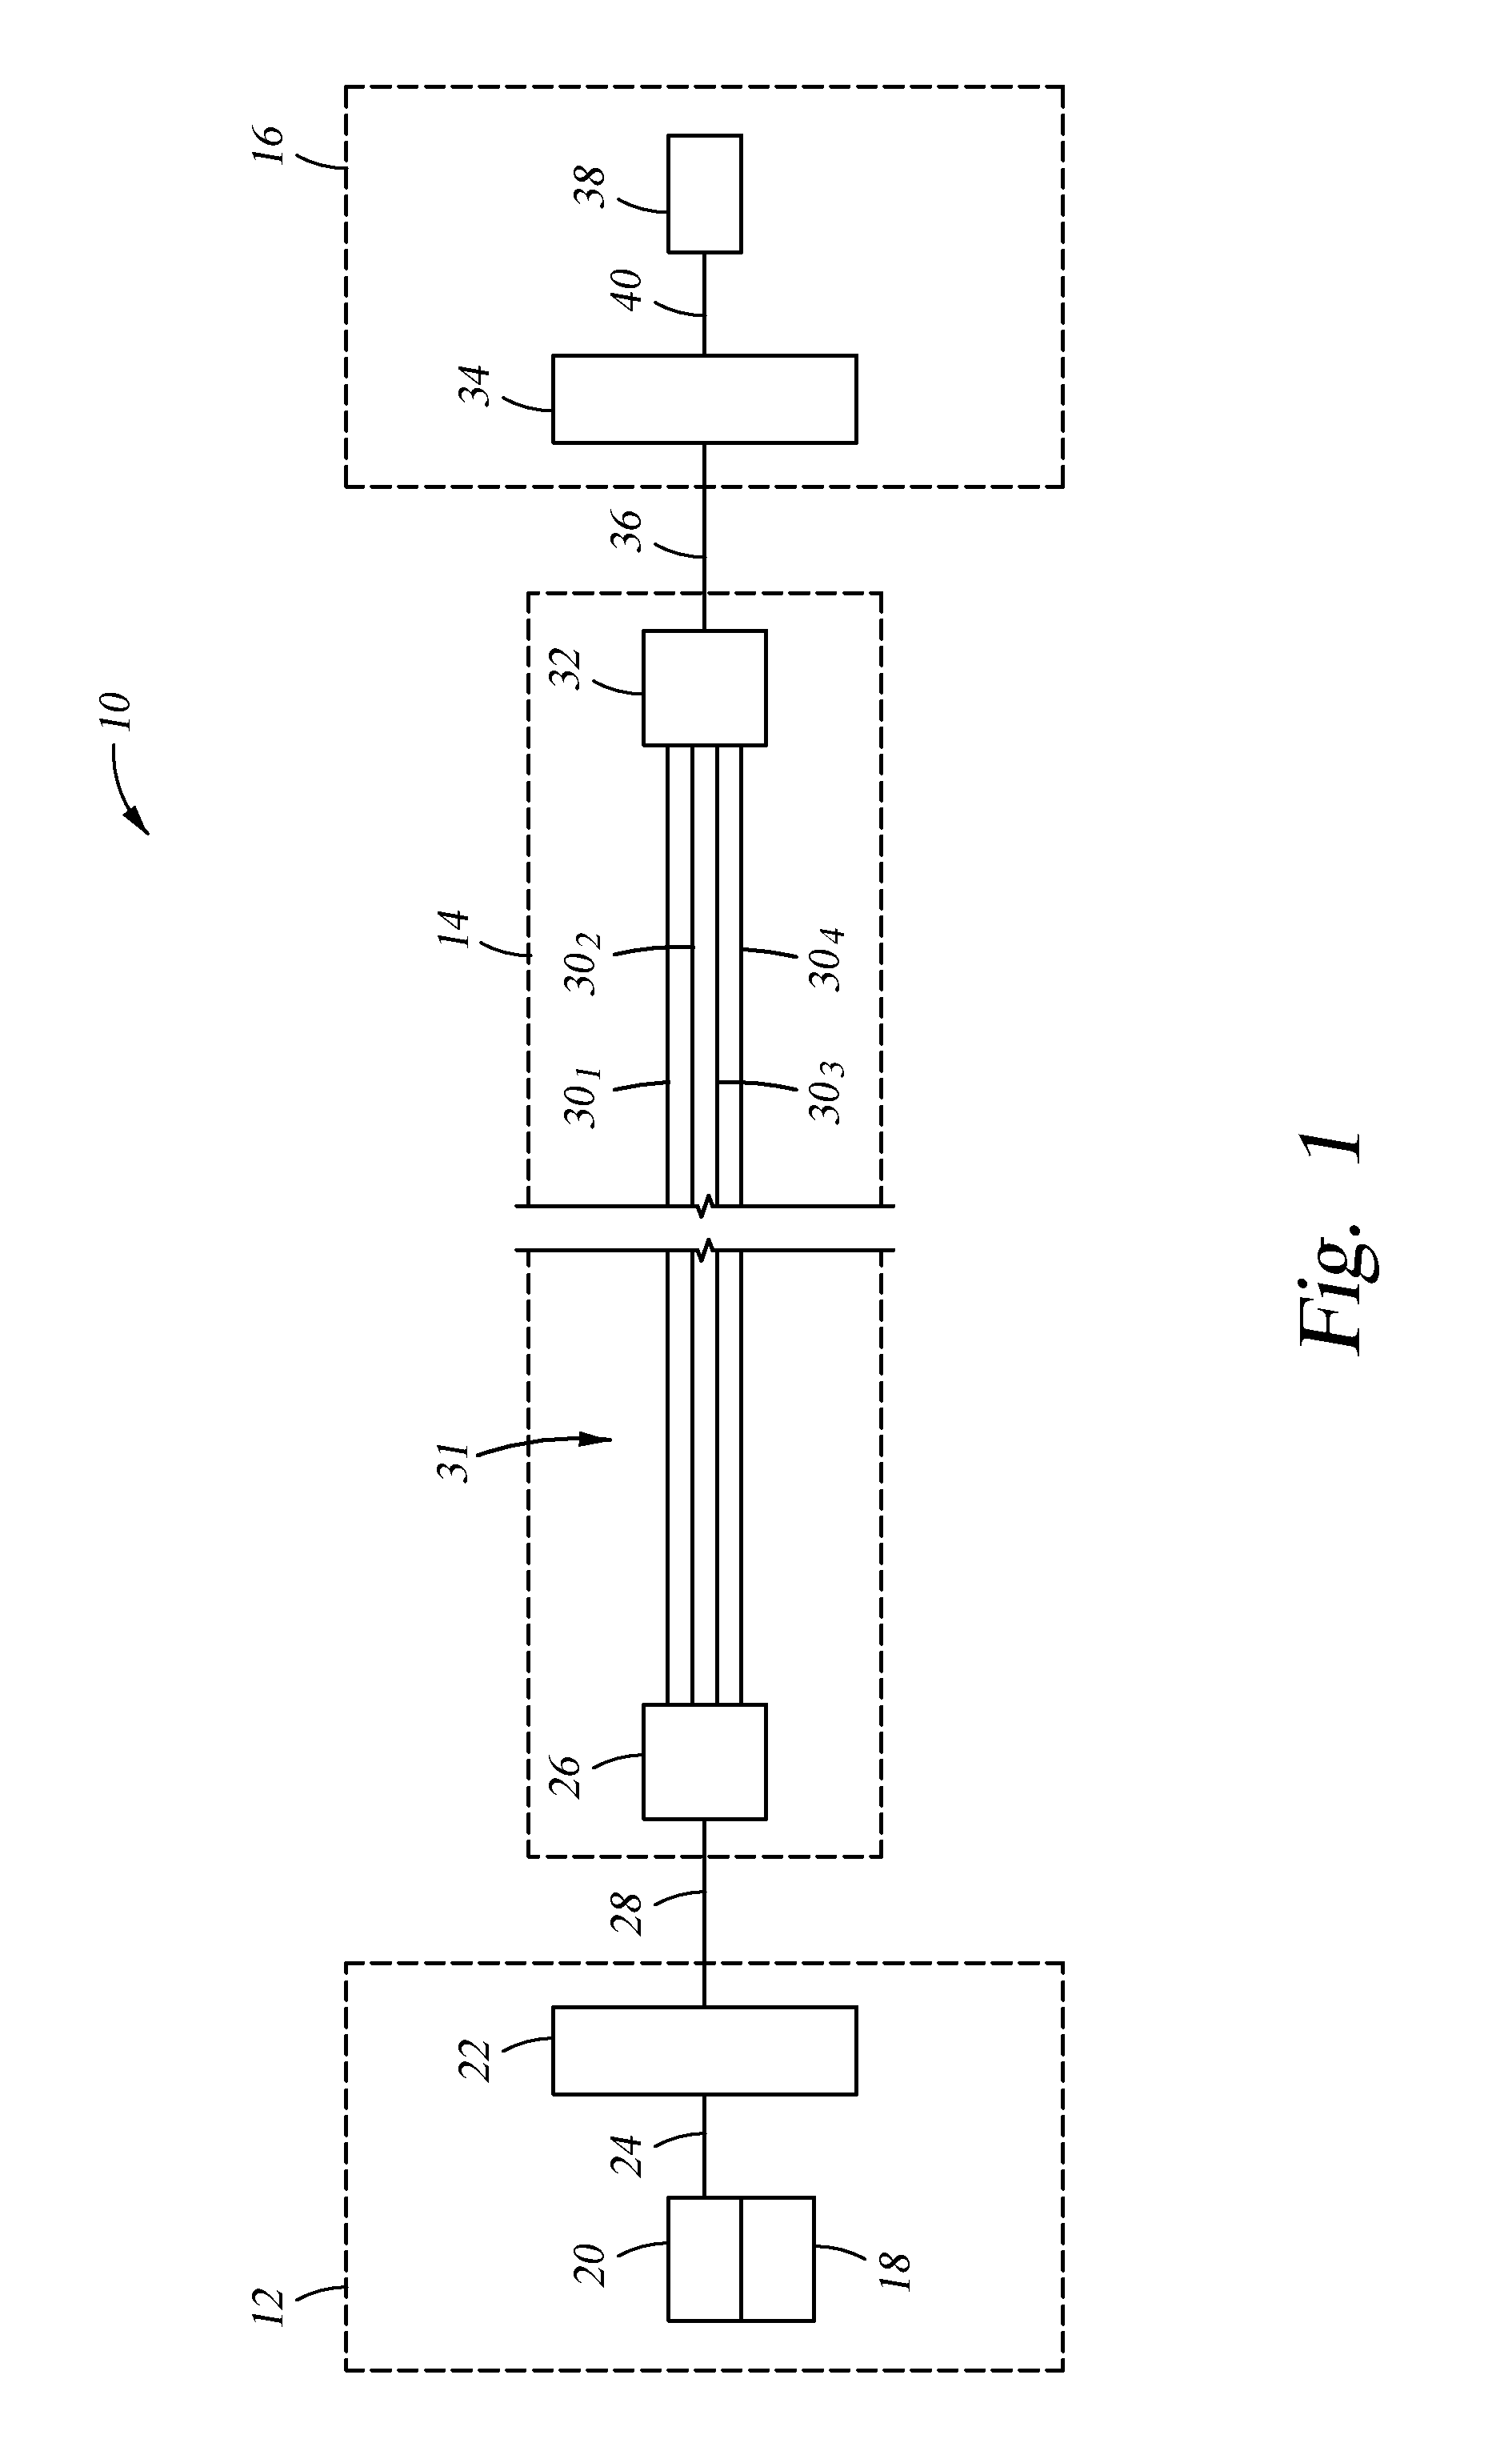 Modular remote power generation and transmission for hydraulic fracturing system